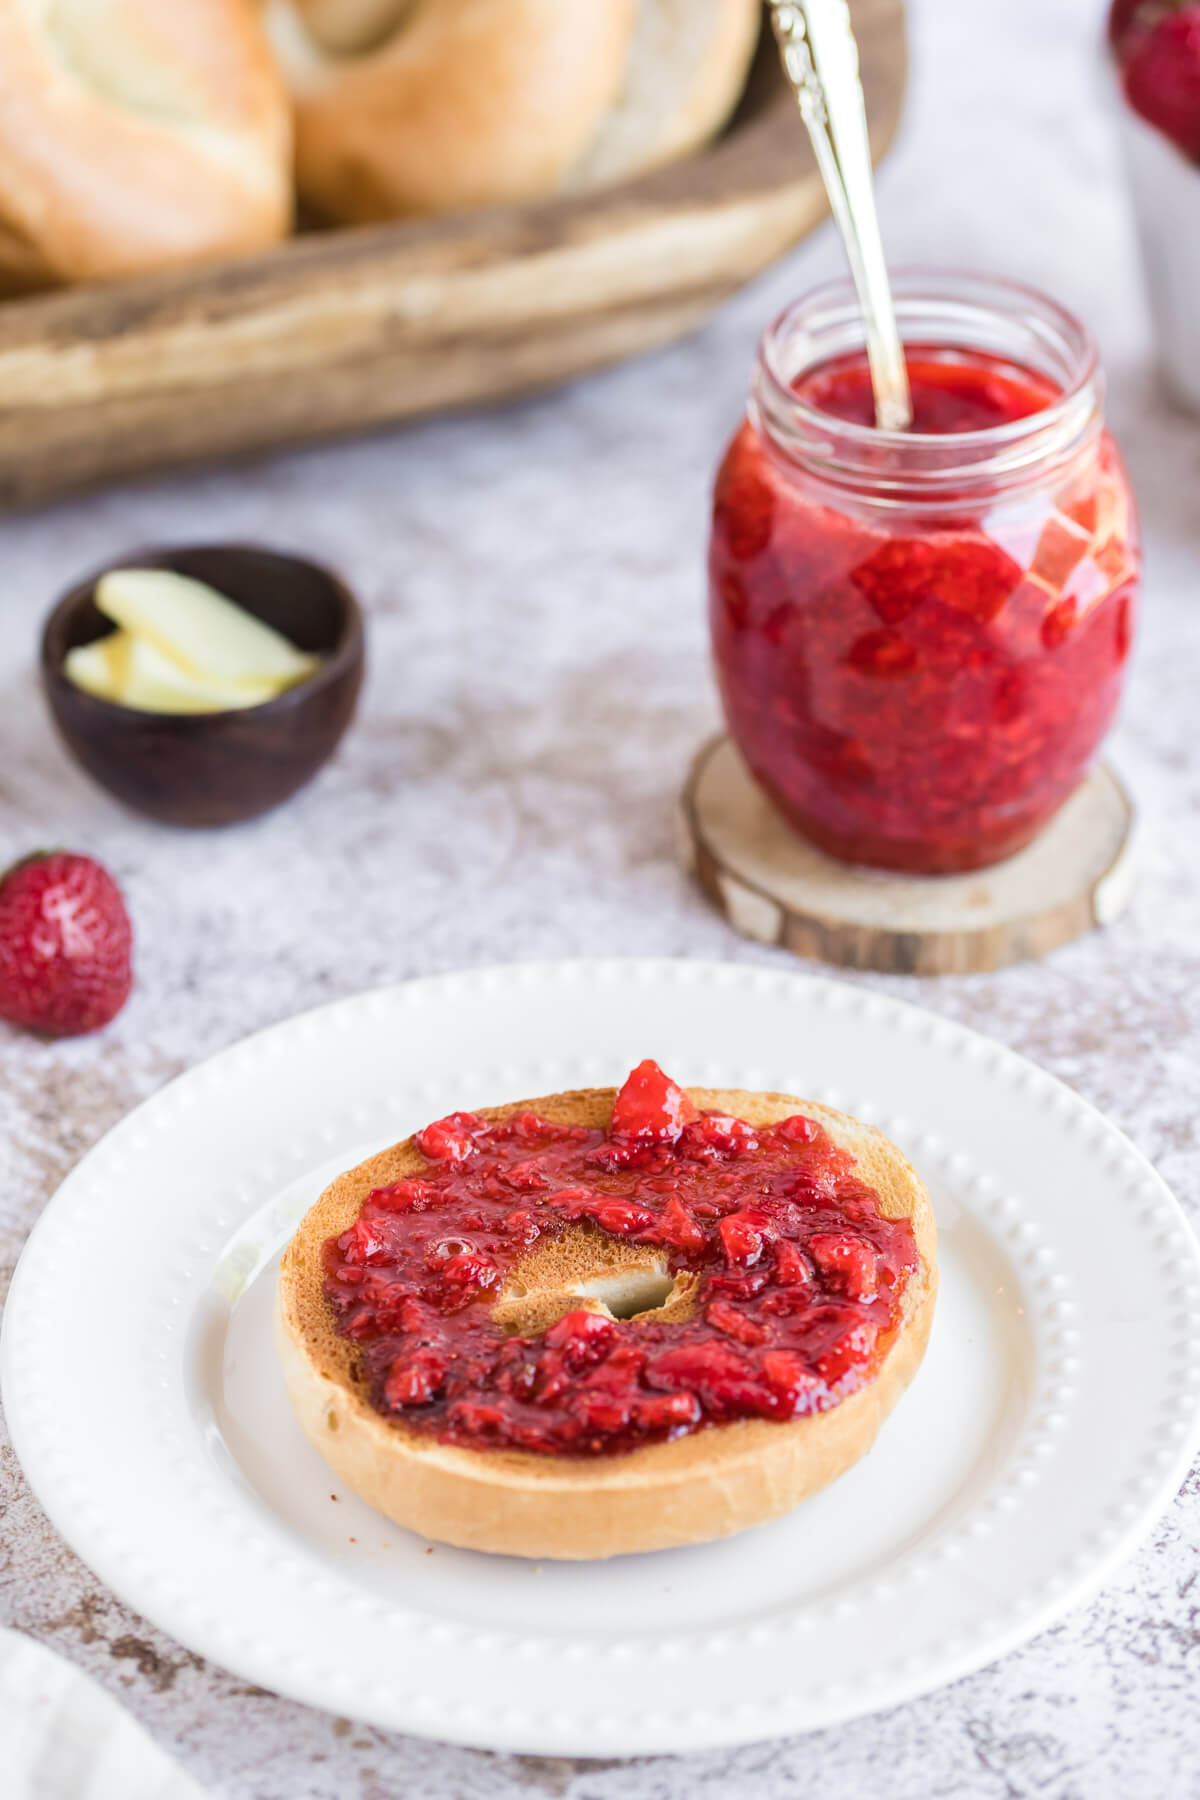 strawberry jam spread on a toasted bagel on a white plate.